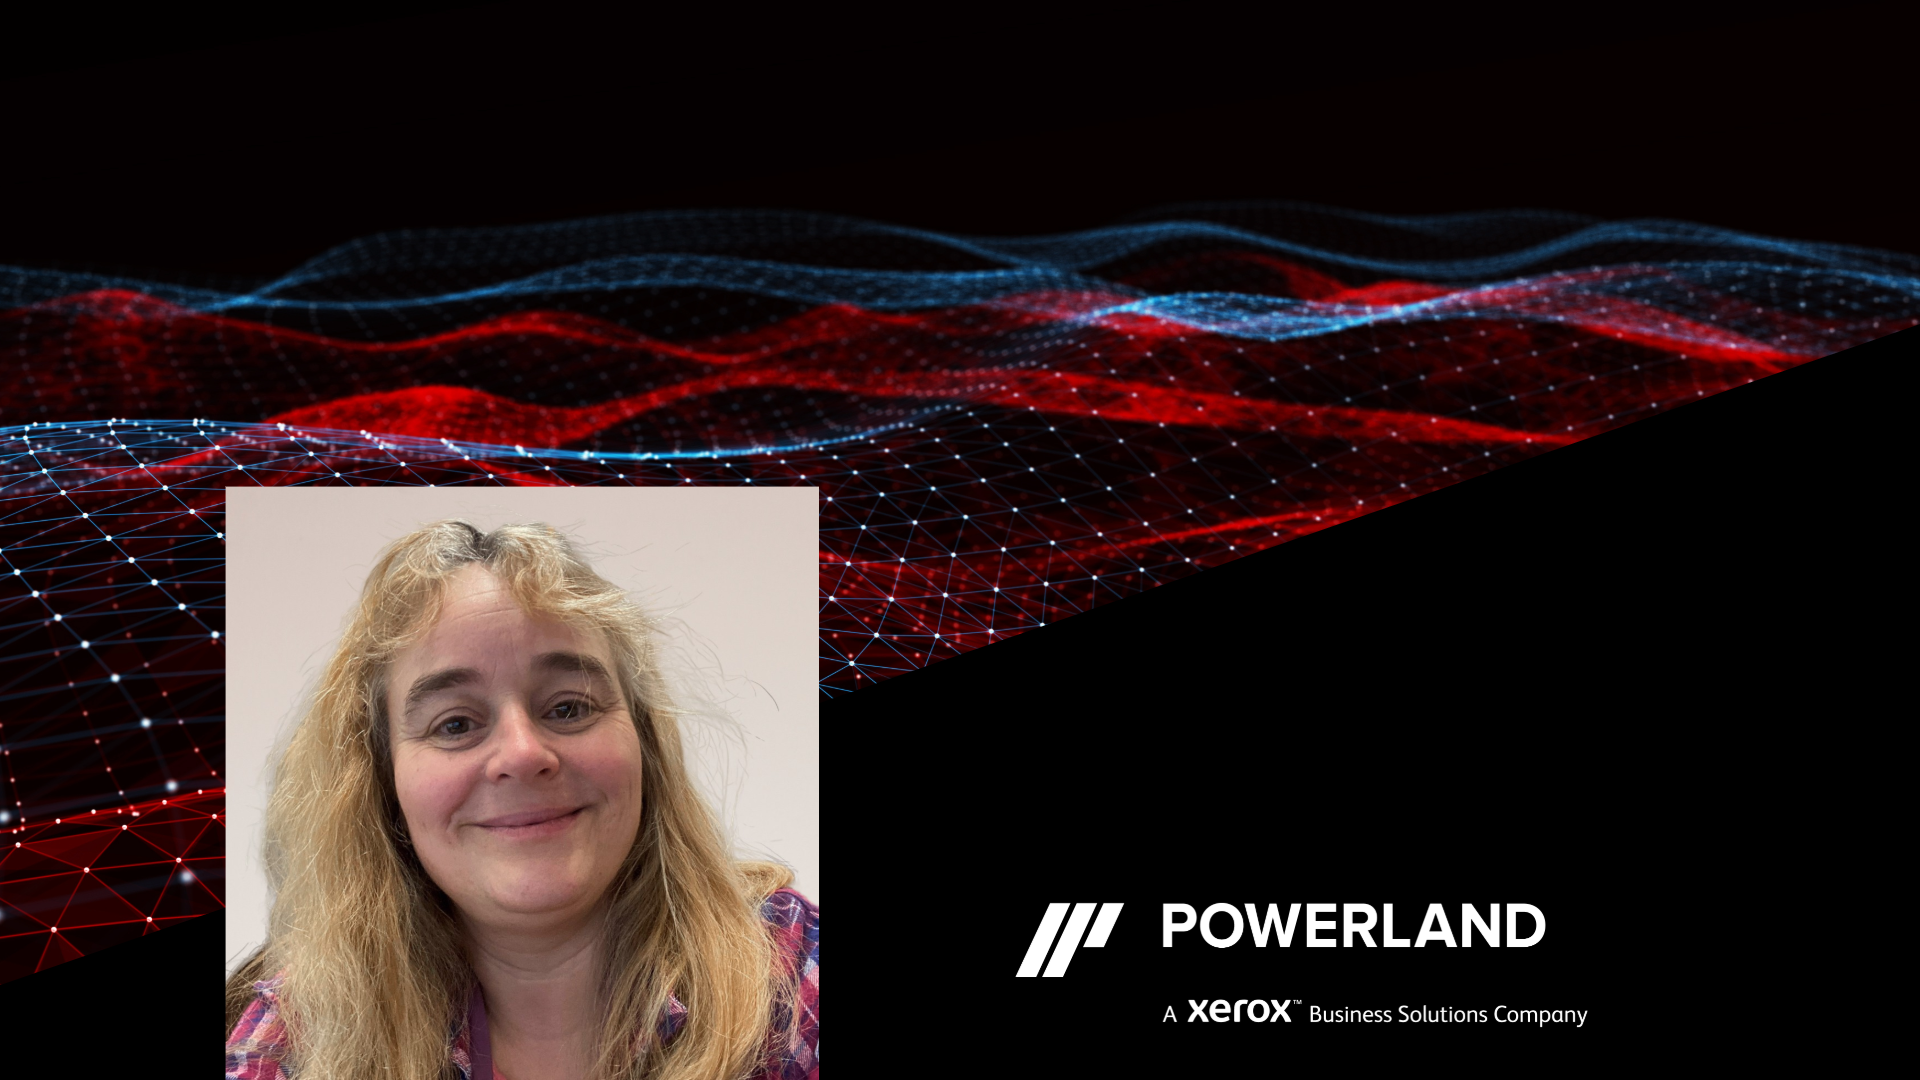 Monika Sommerhalder: A Journey of Dedication and Growth at Powerland